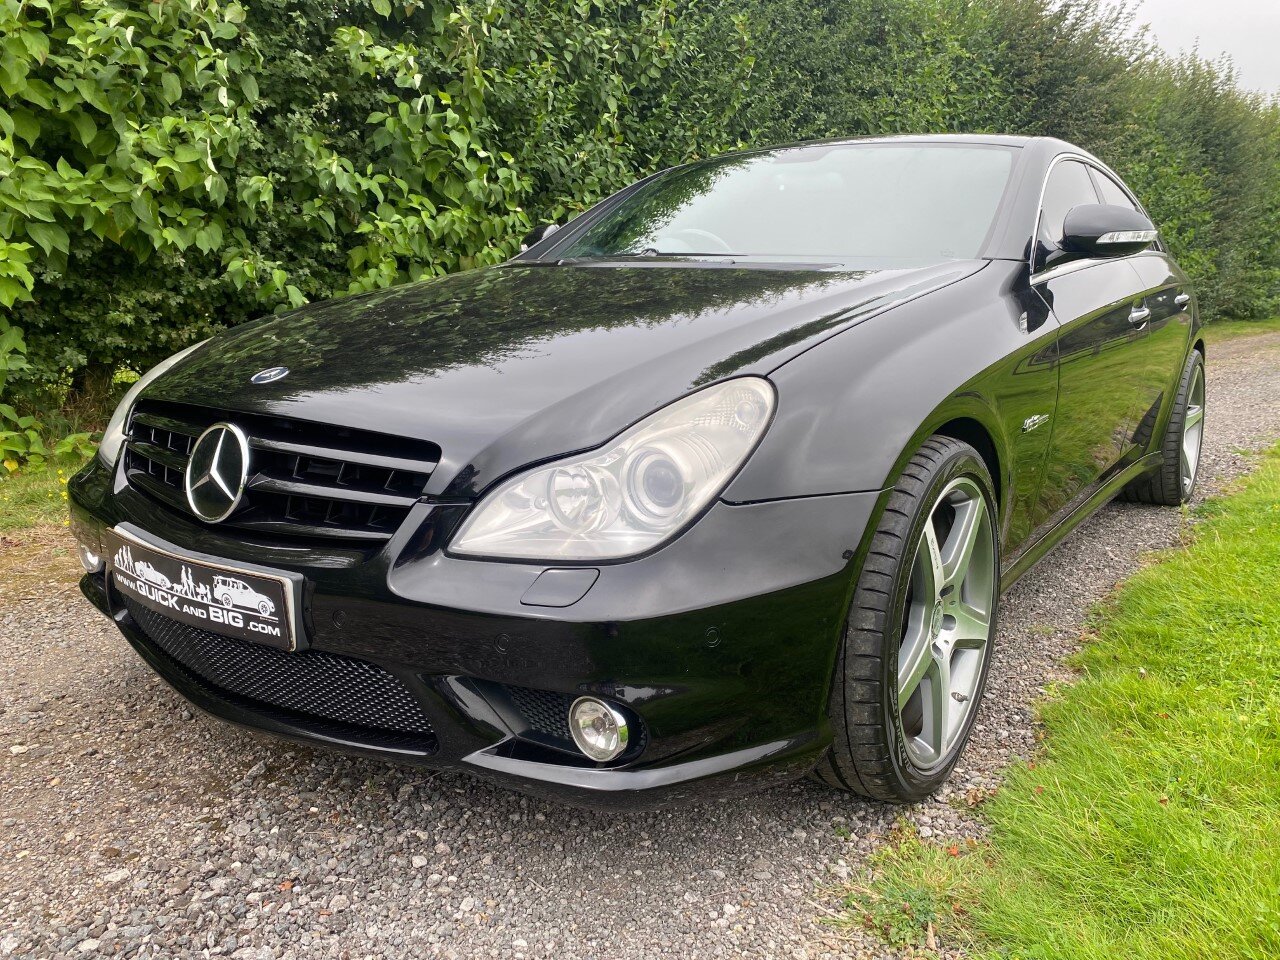 Mercedes CLS63 AMG - Low mileage 